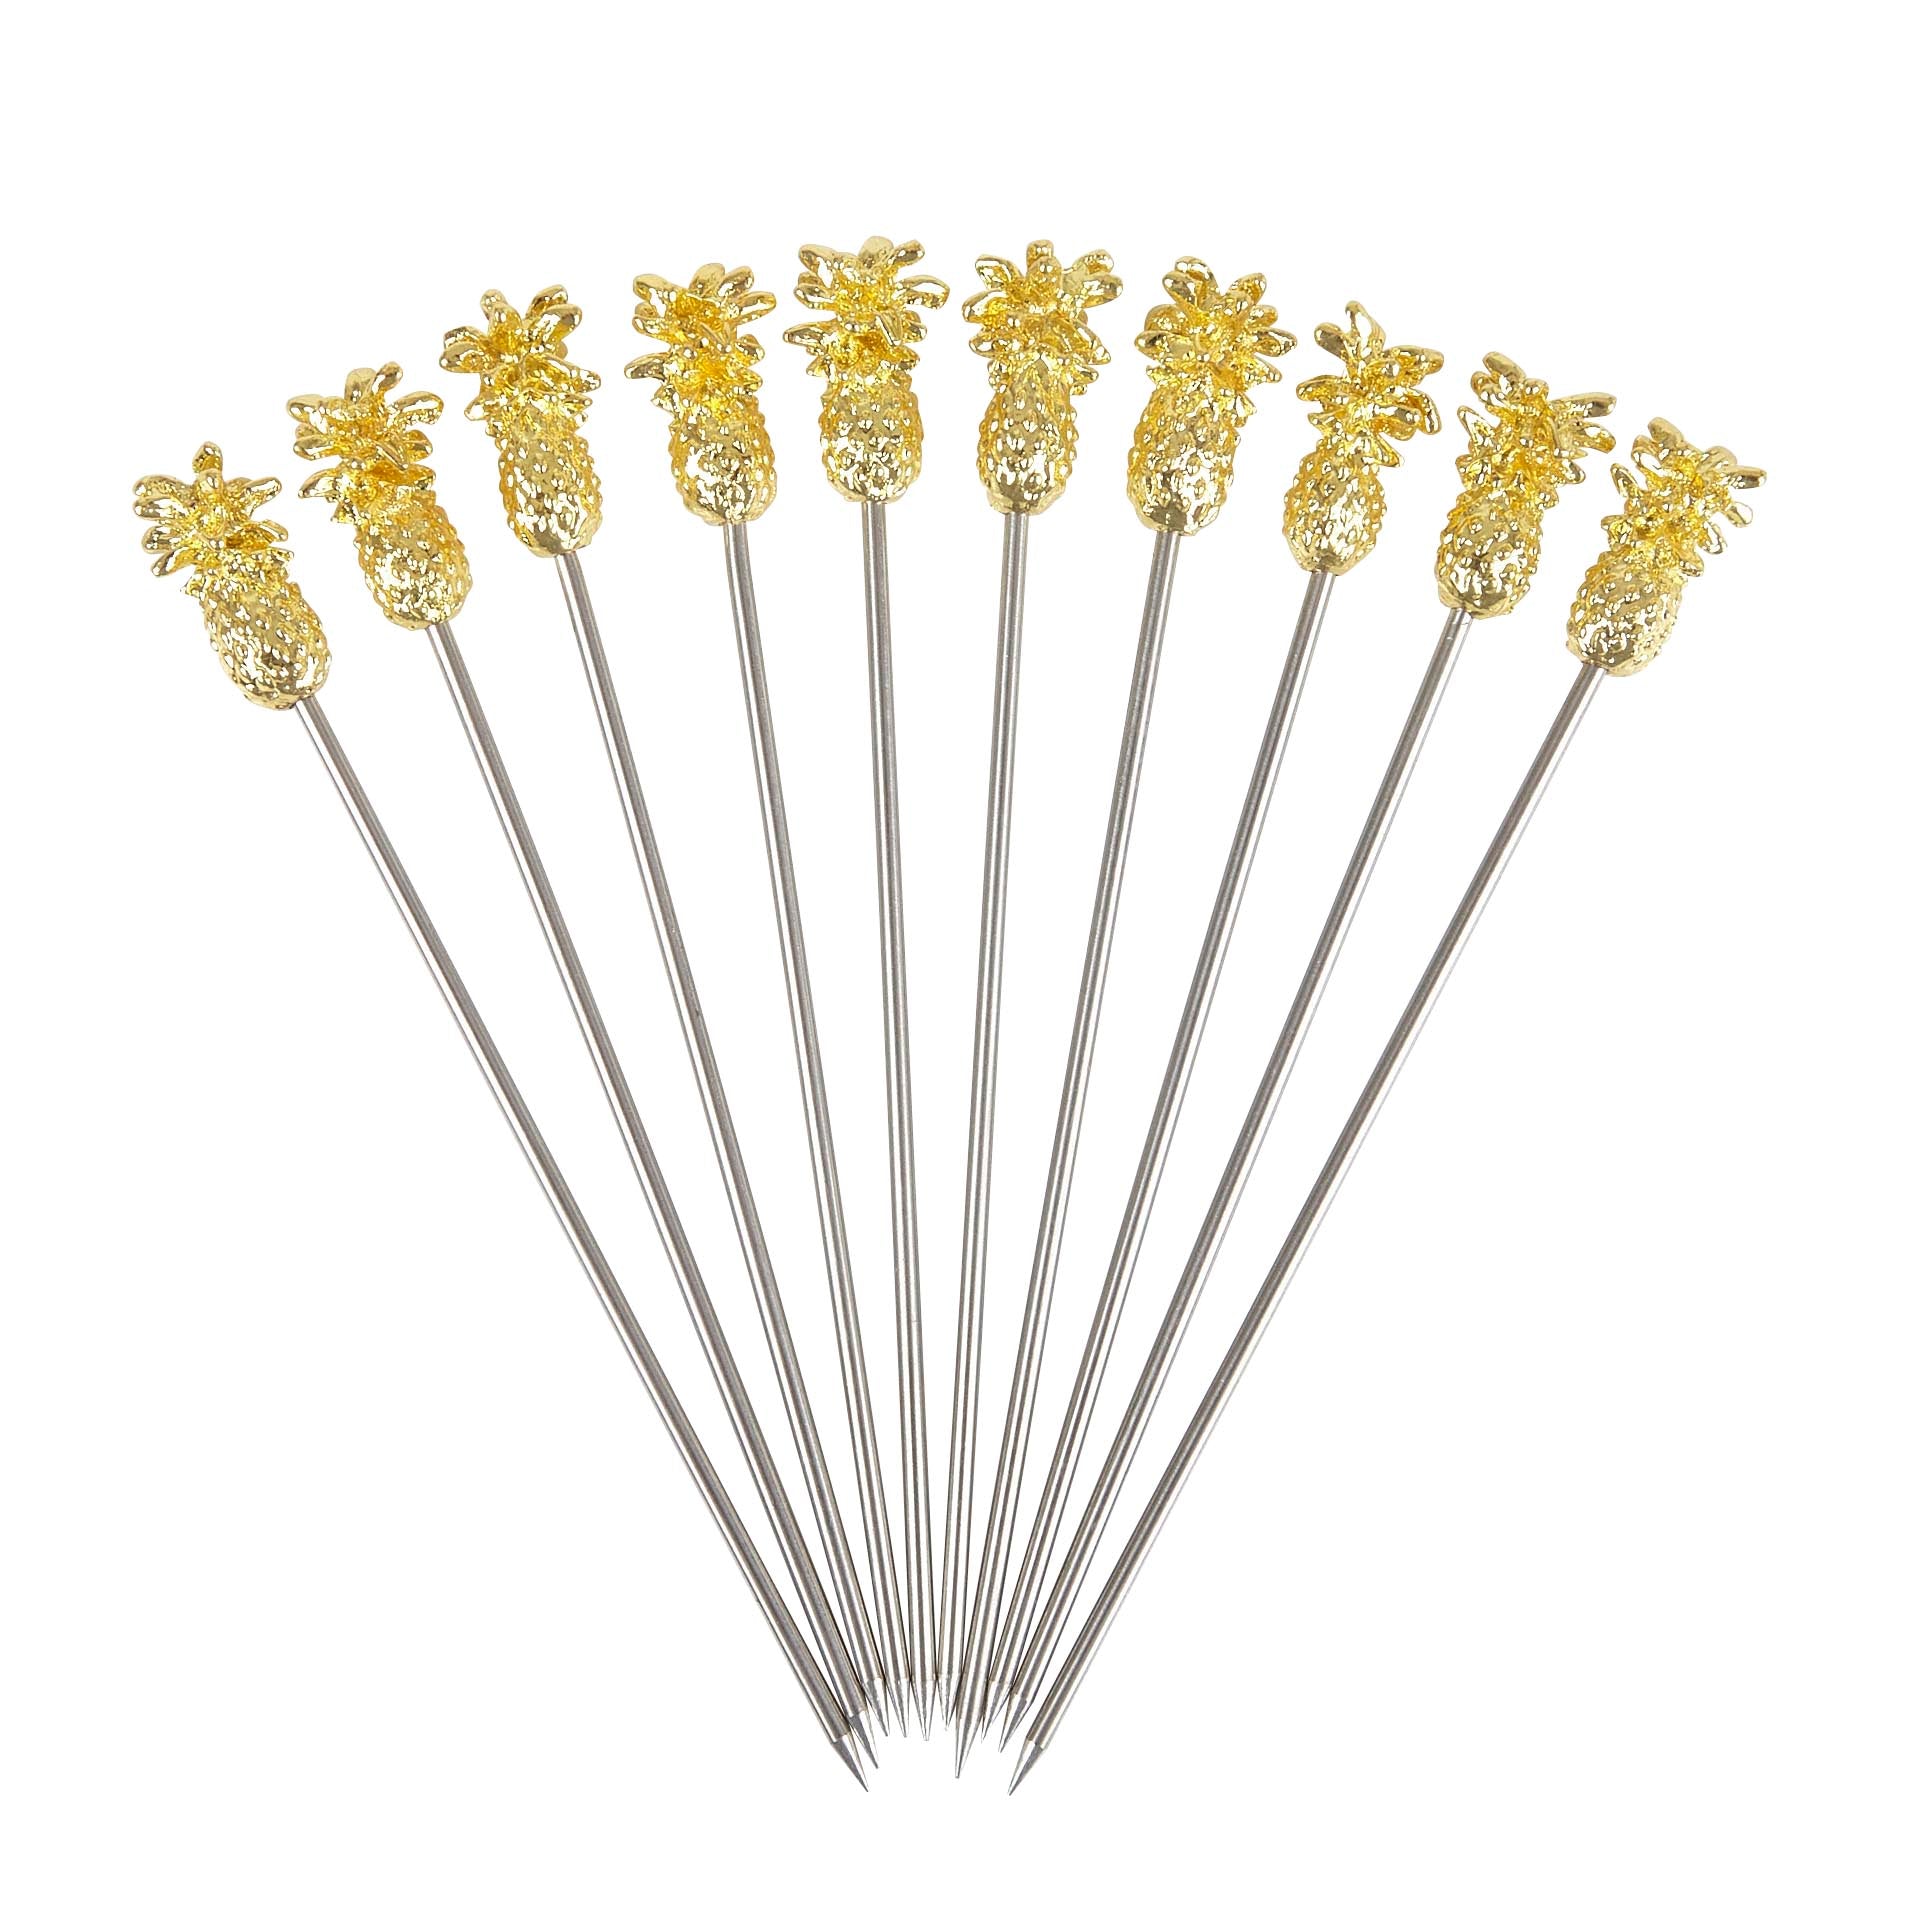 Gold Plated Pineapple Cocktail Garnish Picks 10 pack